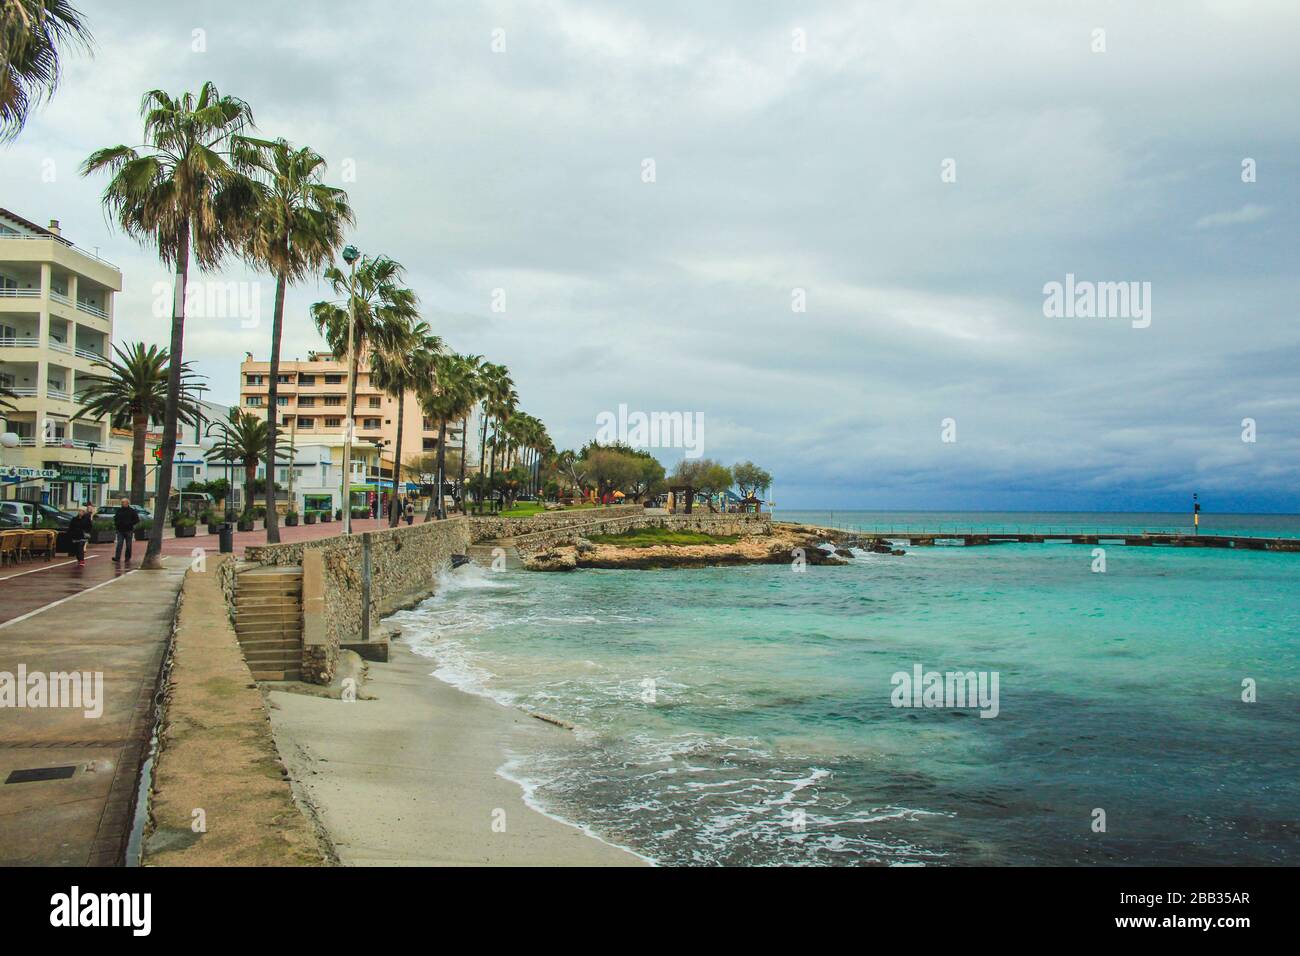 Cala Millor, Mallorca / Spain - March 24 2018: Only a few people walking along the promenade in Cala Millor, which is a famous tourist spot in summer Stock Photo